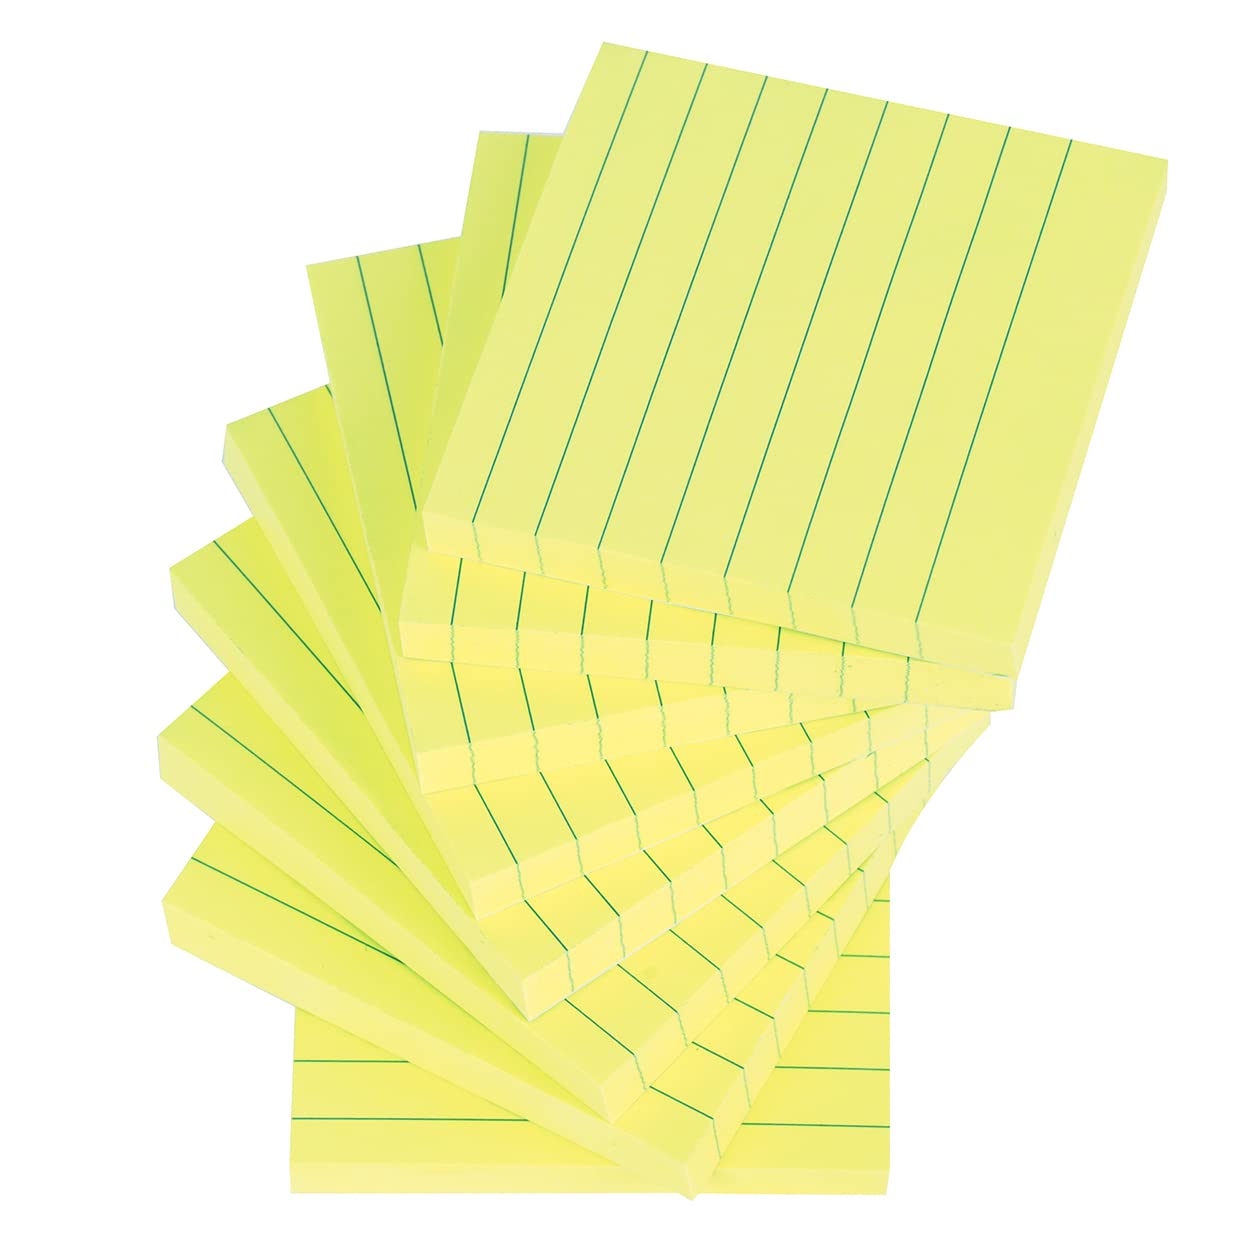 Vanpad Vanpad-193 Lined Sticky Notes 3x3 Inches, Lemon Yellow Ruled  Self-Stick Pads, Easy to Post for Home, Office, Notebook, 8 PadsPack